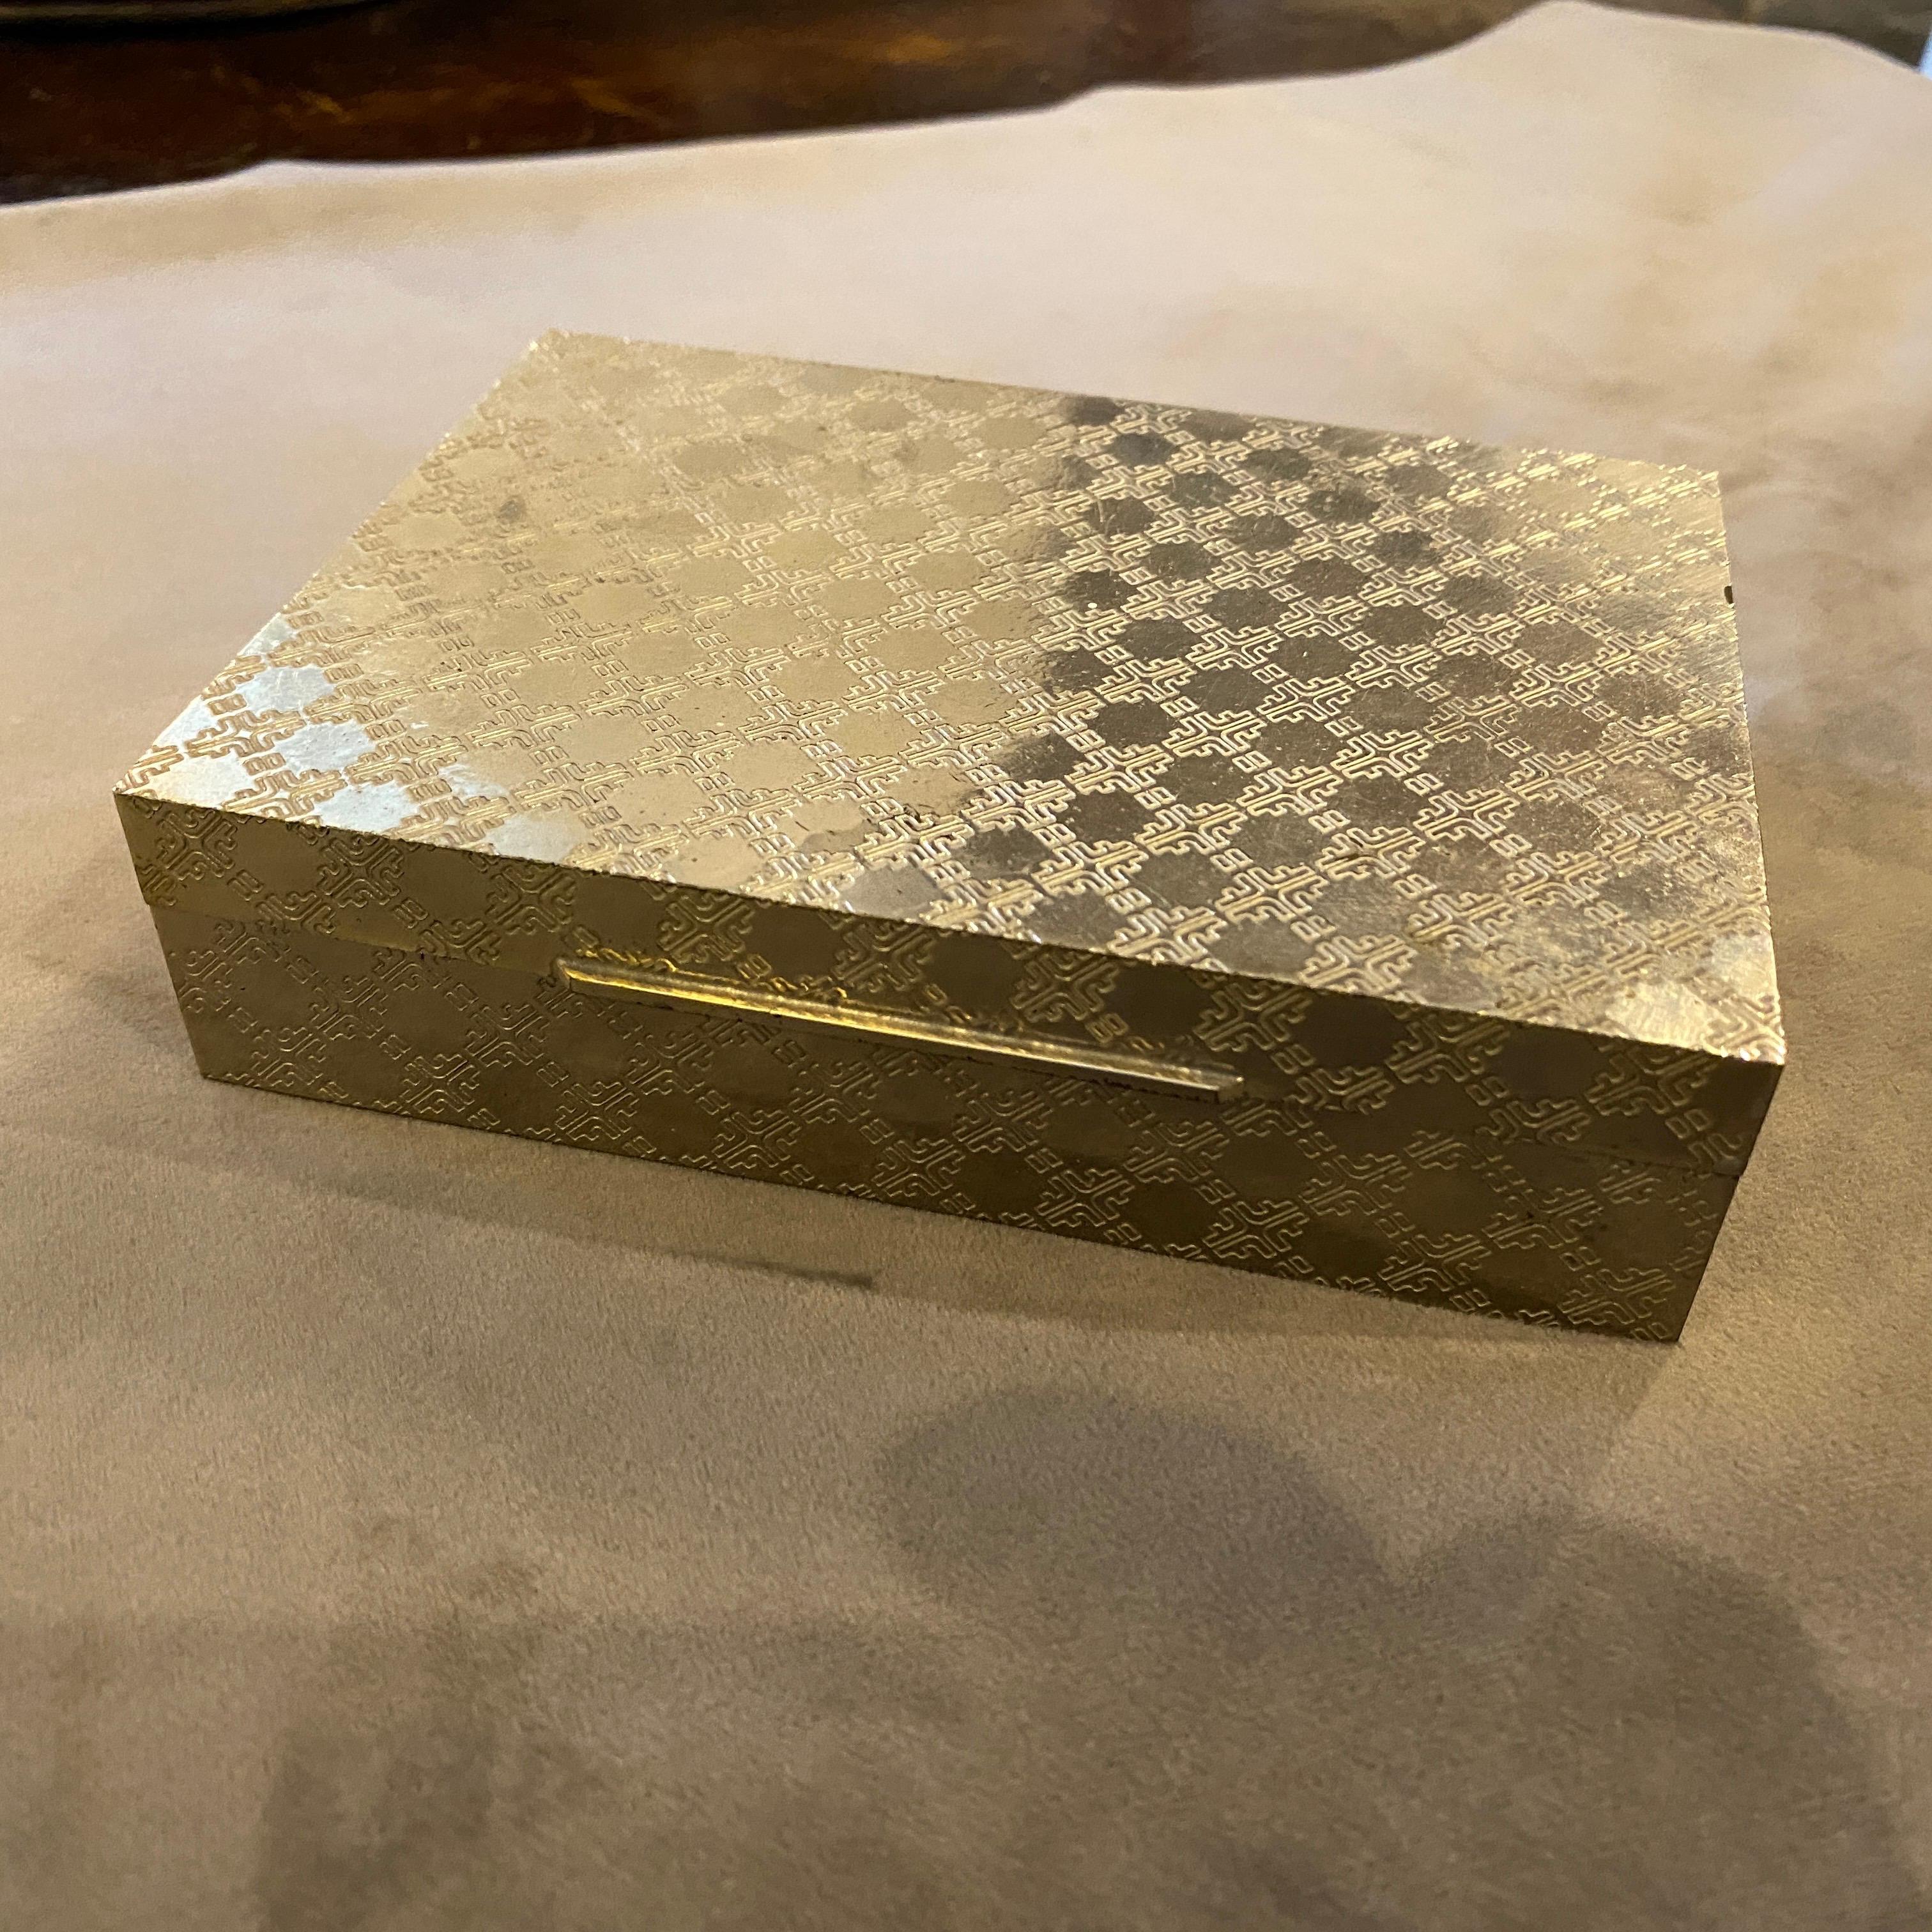 An engraved silver plated cigarette box made in Italy in the Eighties by Salvatore Ferragamo, good conditions overall